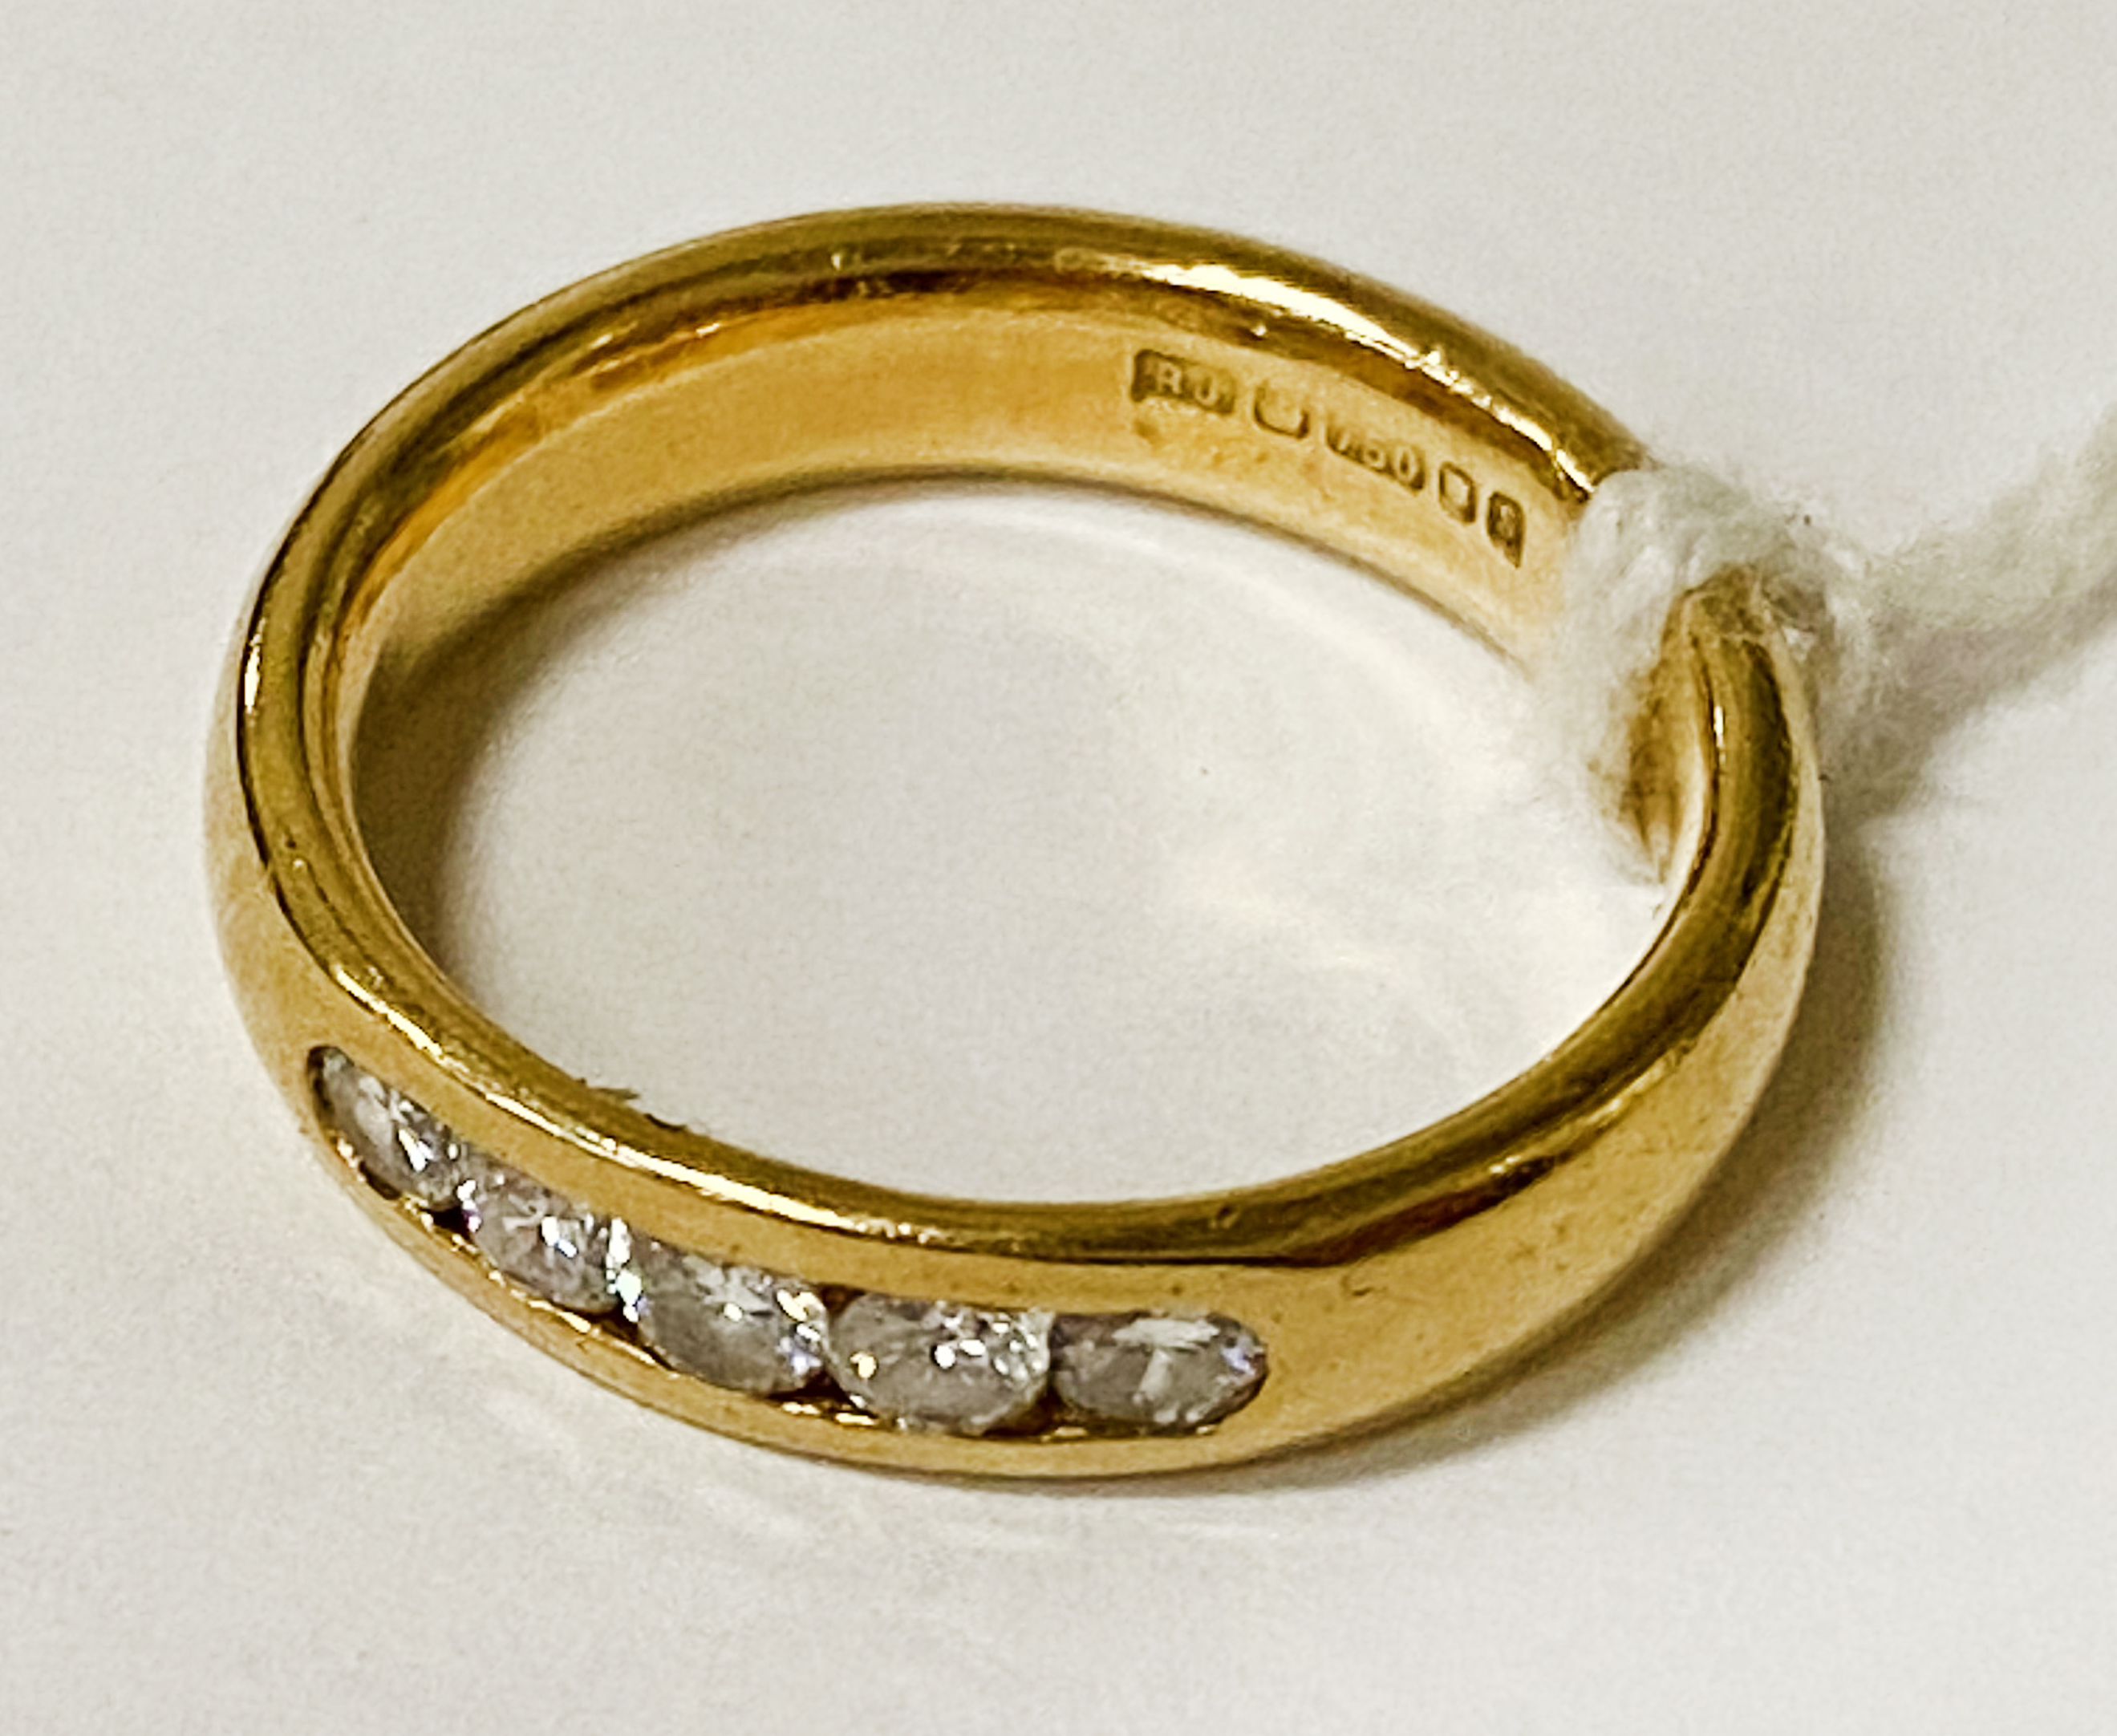 18CT YELLOW GOLD WEDDING BAND 5.1 GRAMS OF GOLD - SET WITH 5 DIAMONDS SIZE I